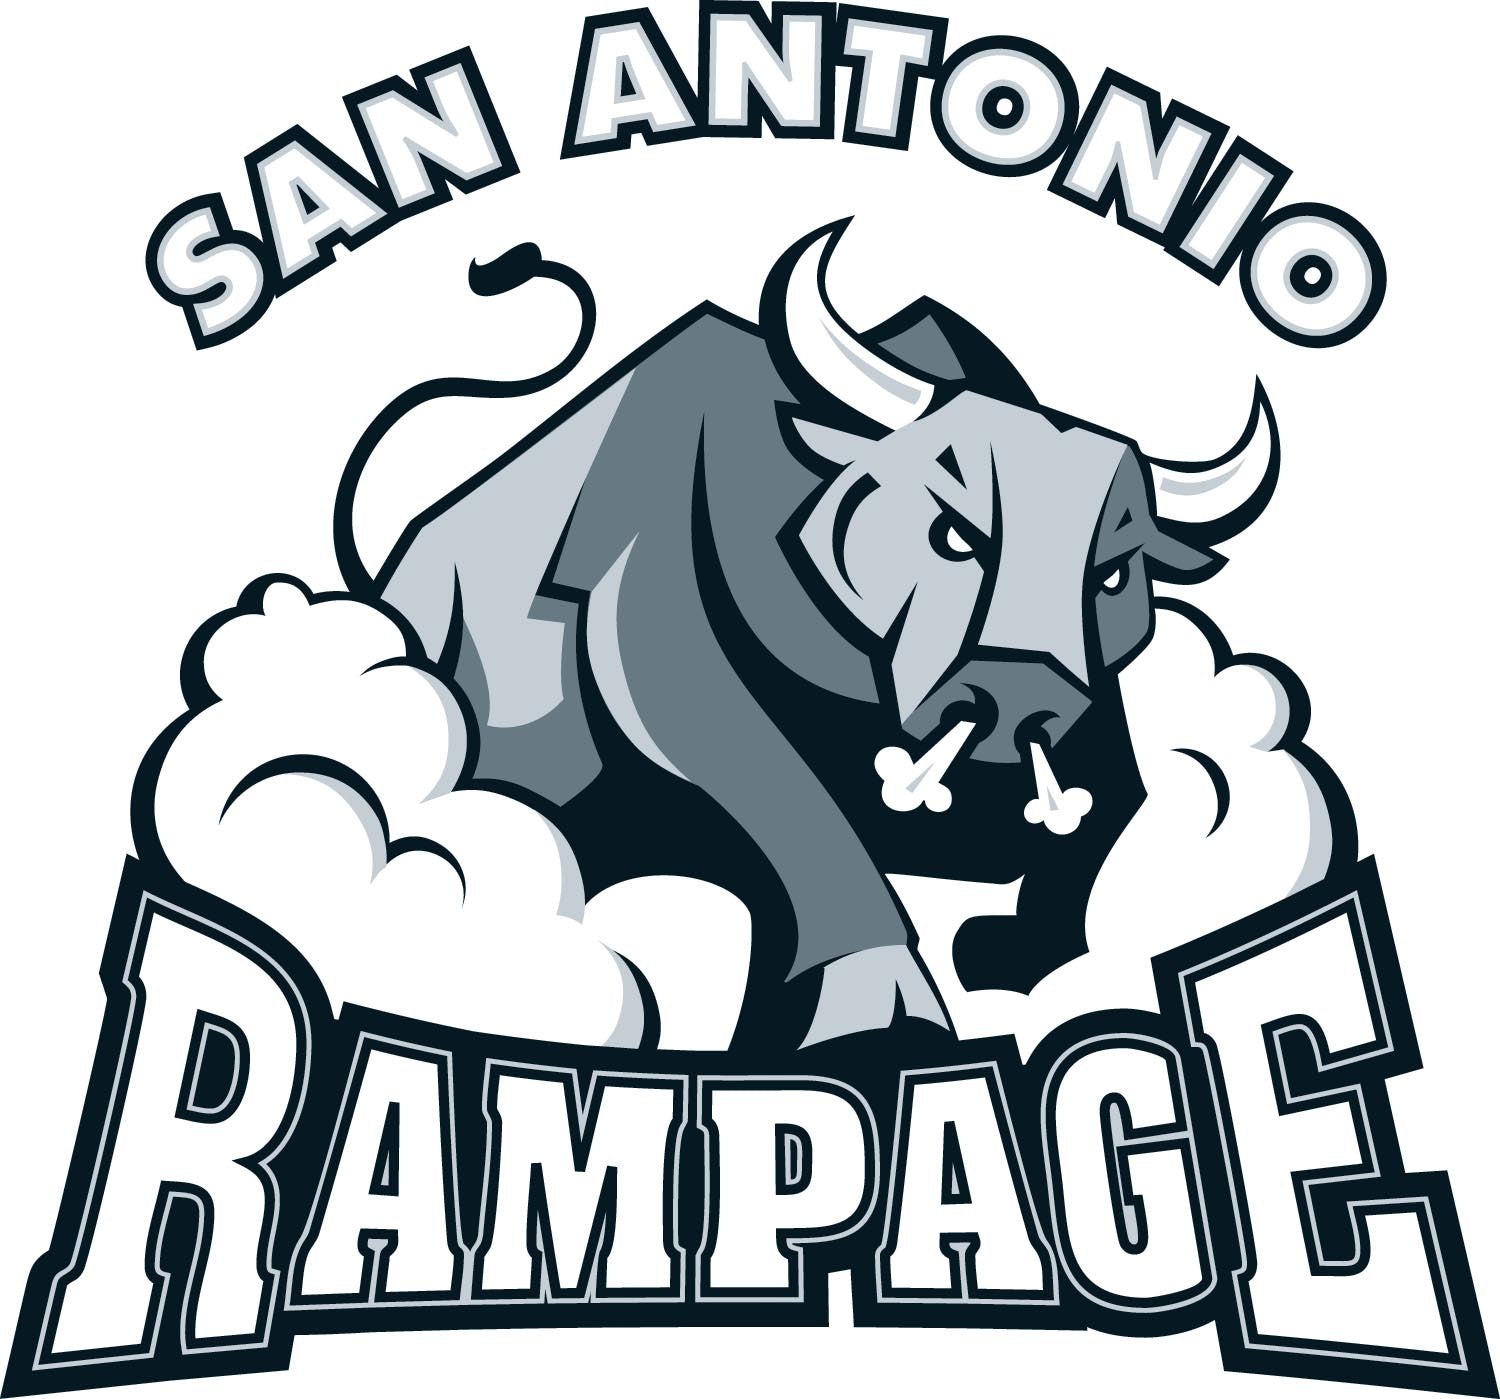 San Antonio Rampage - In love with this year's Chimuelos jerseys